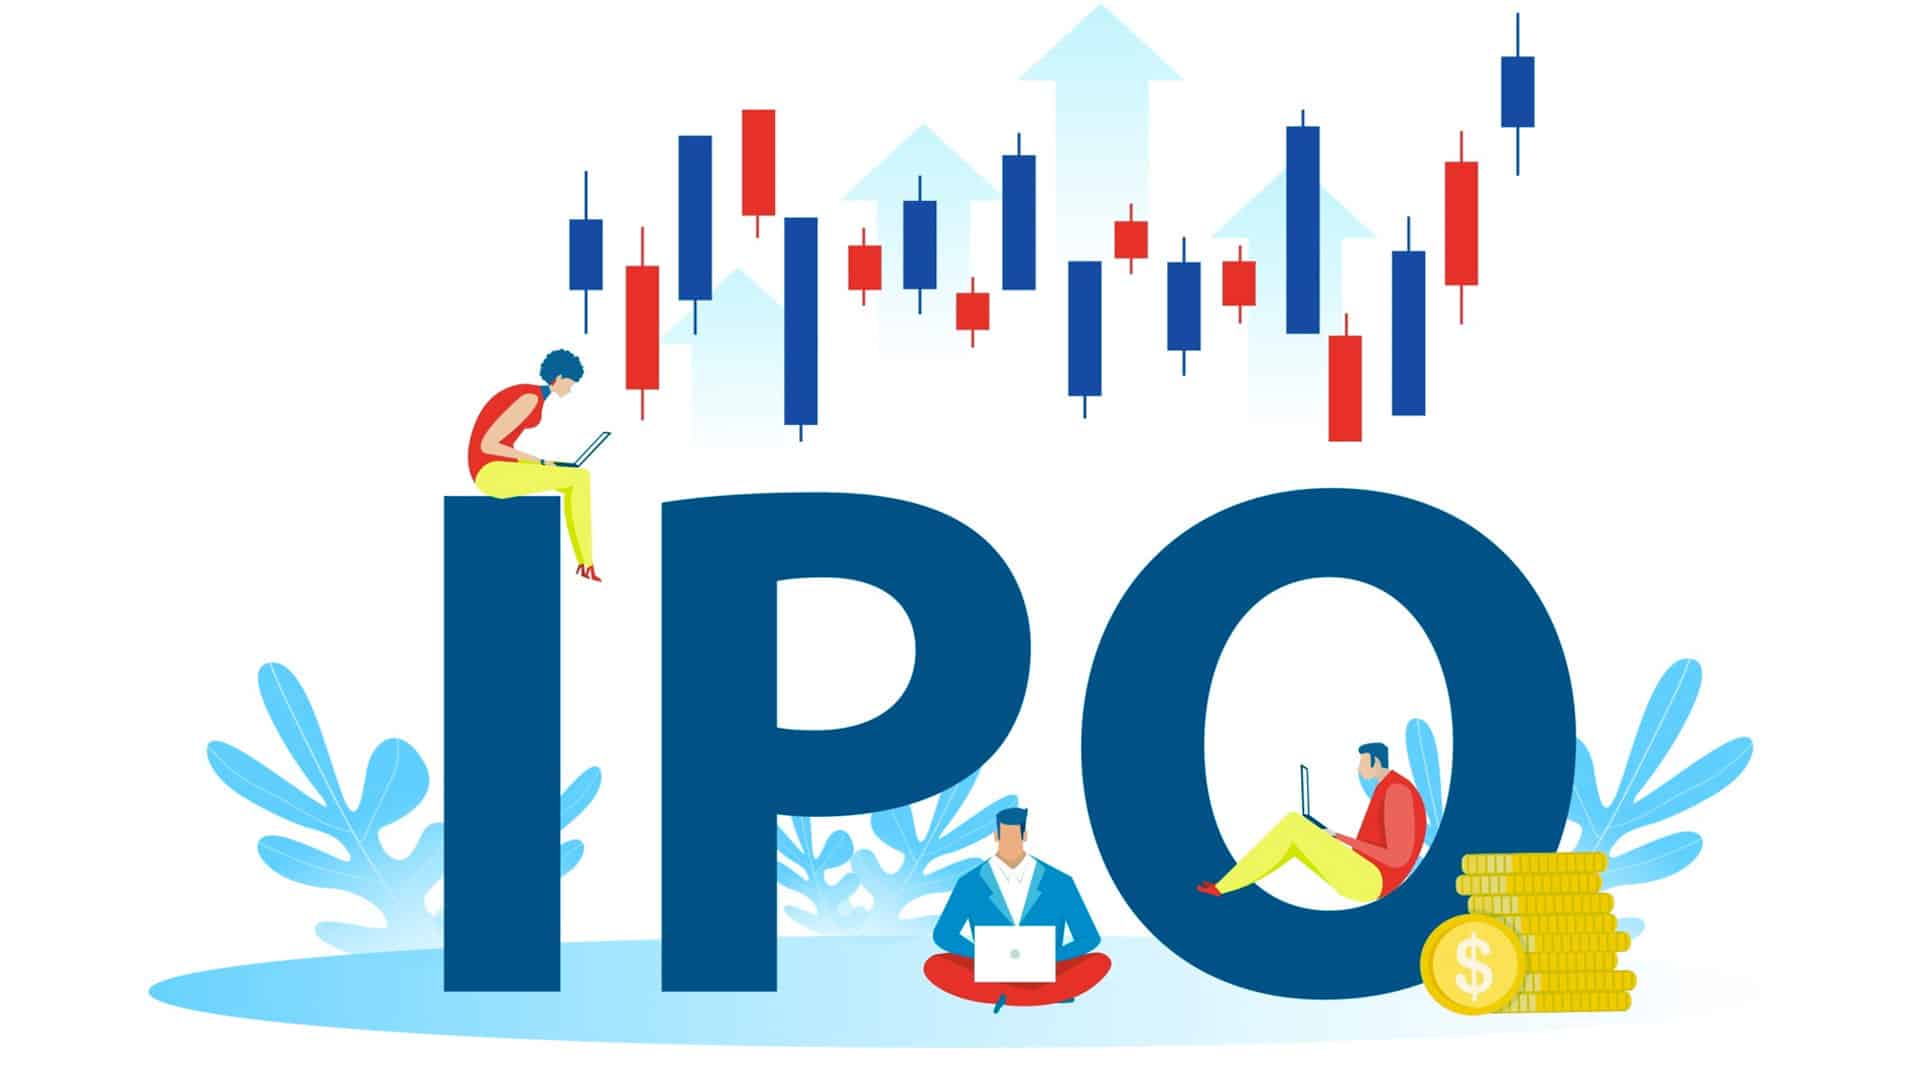 IPO fireworks in New Year too; cos likely to garner Rs 1.5 lakh cr through initial share sales